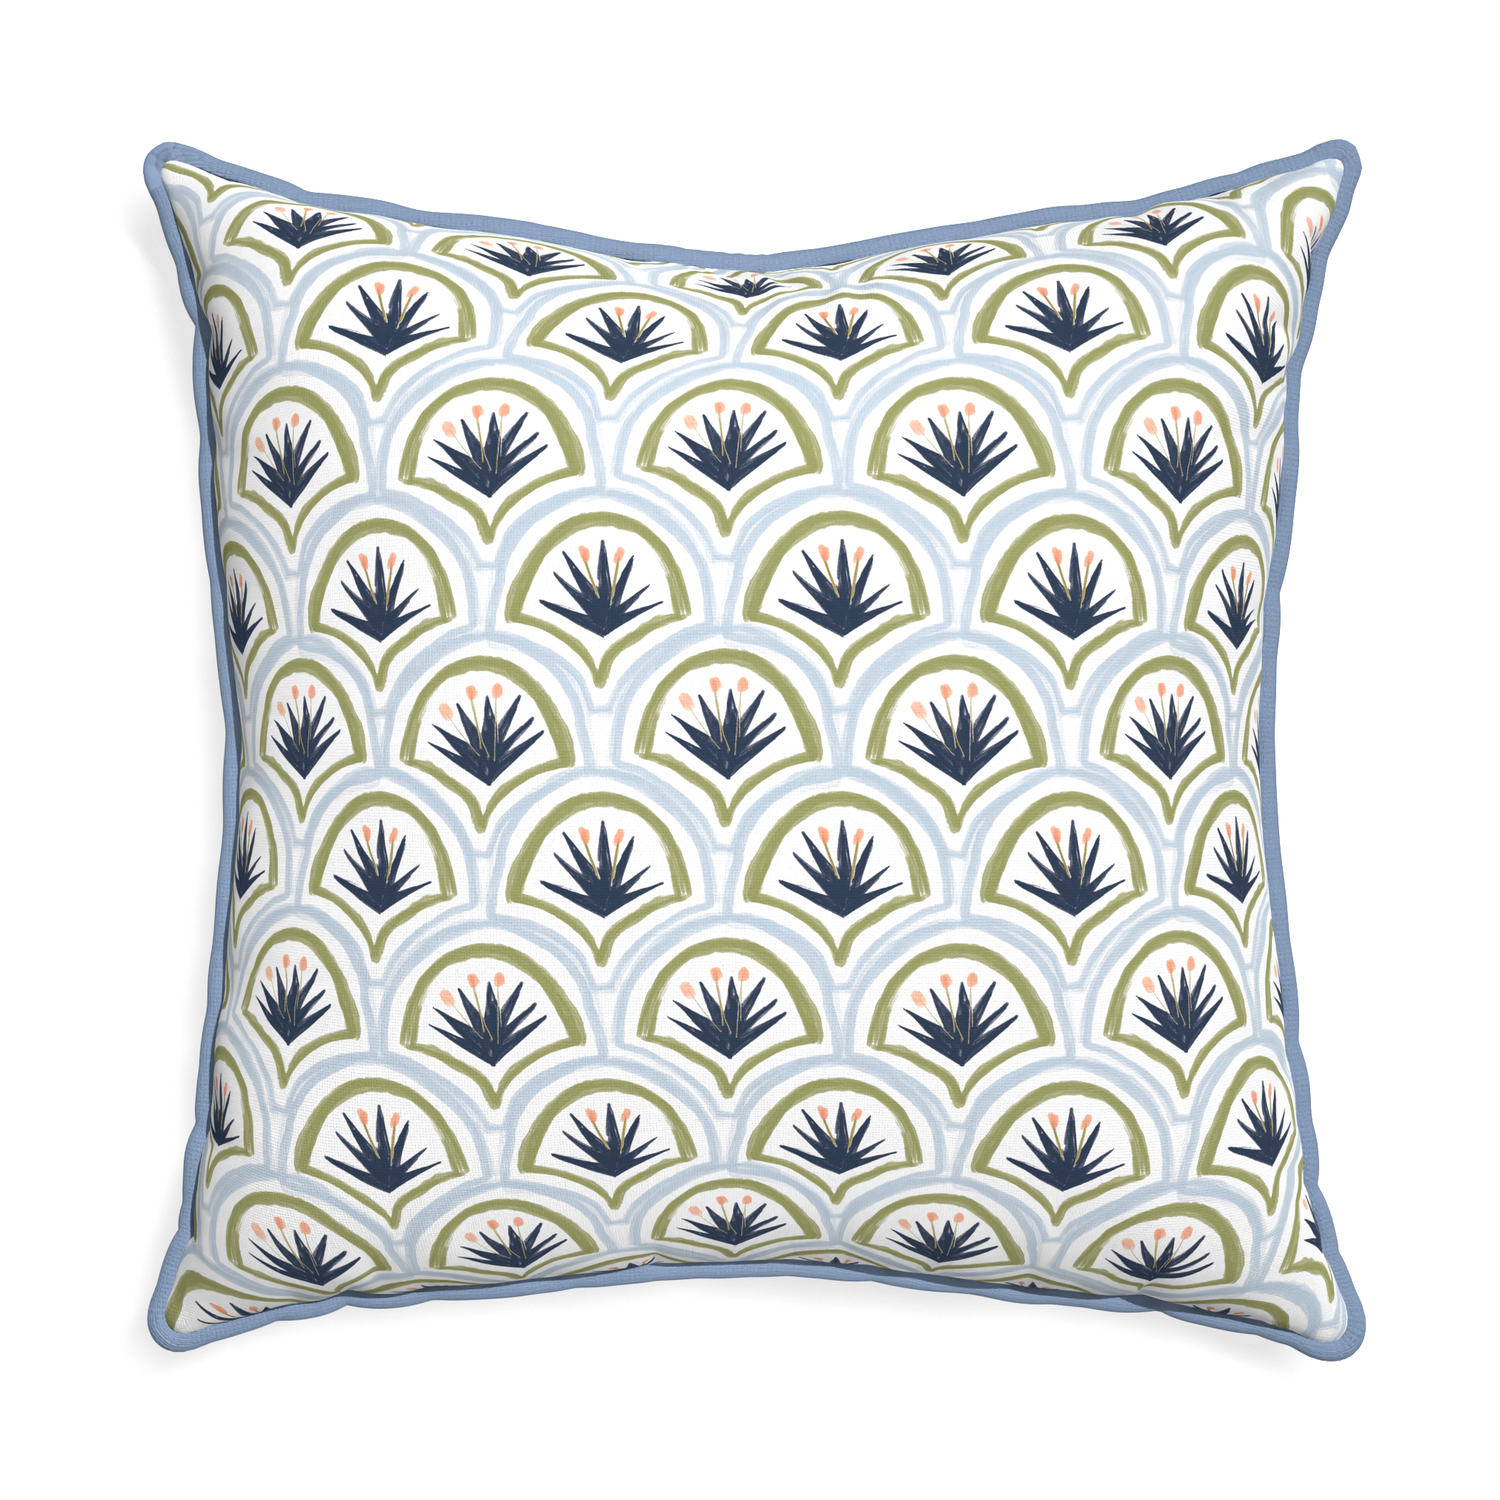 Euro-sham thatcher midnight custom art deco palm patternpillow with sky piping on white background